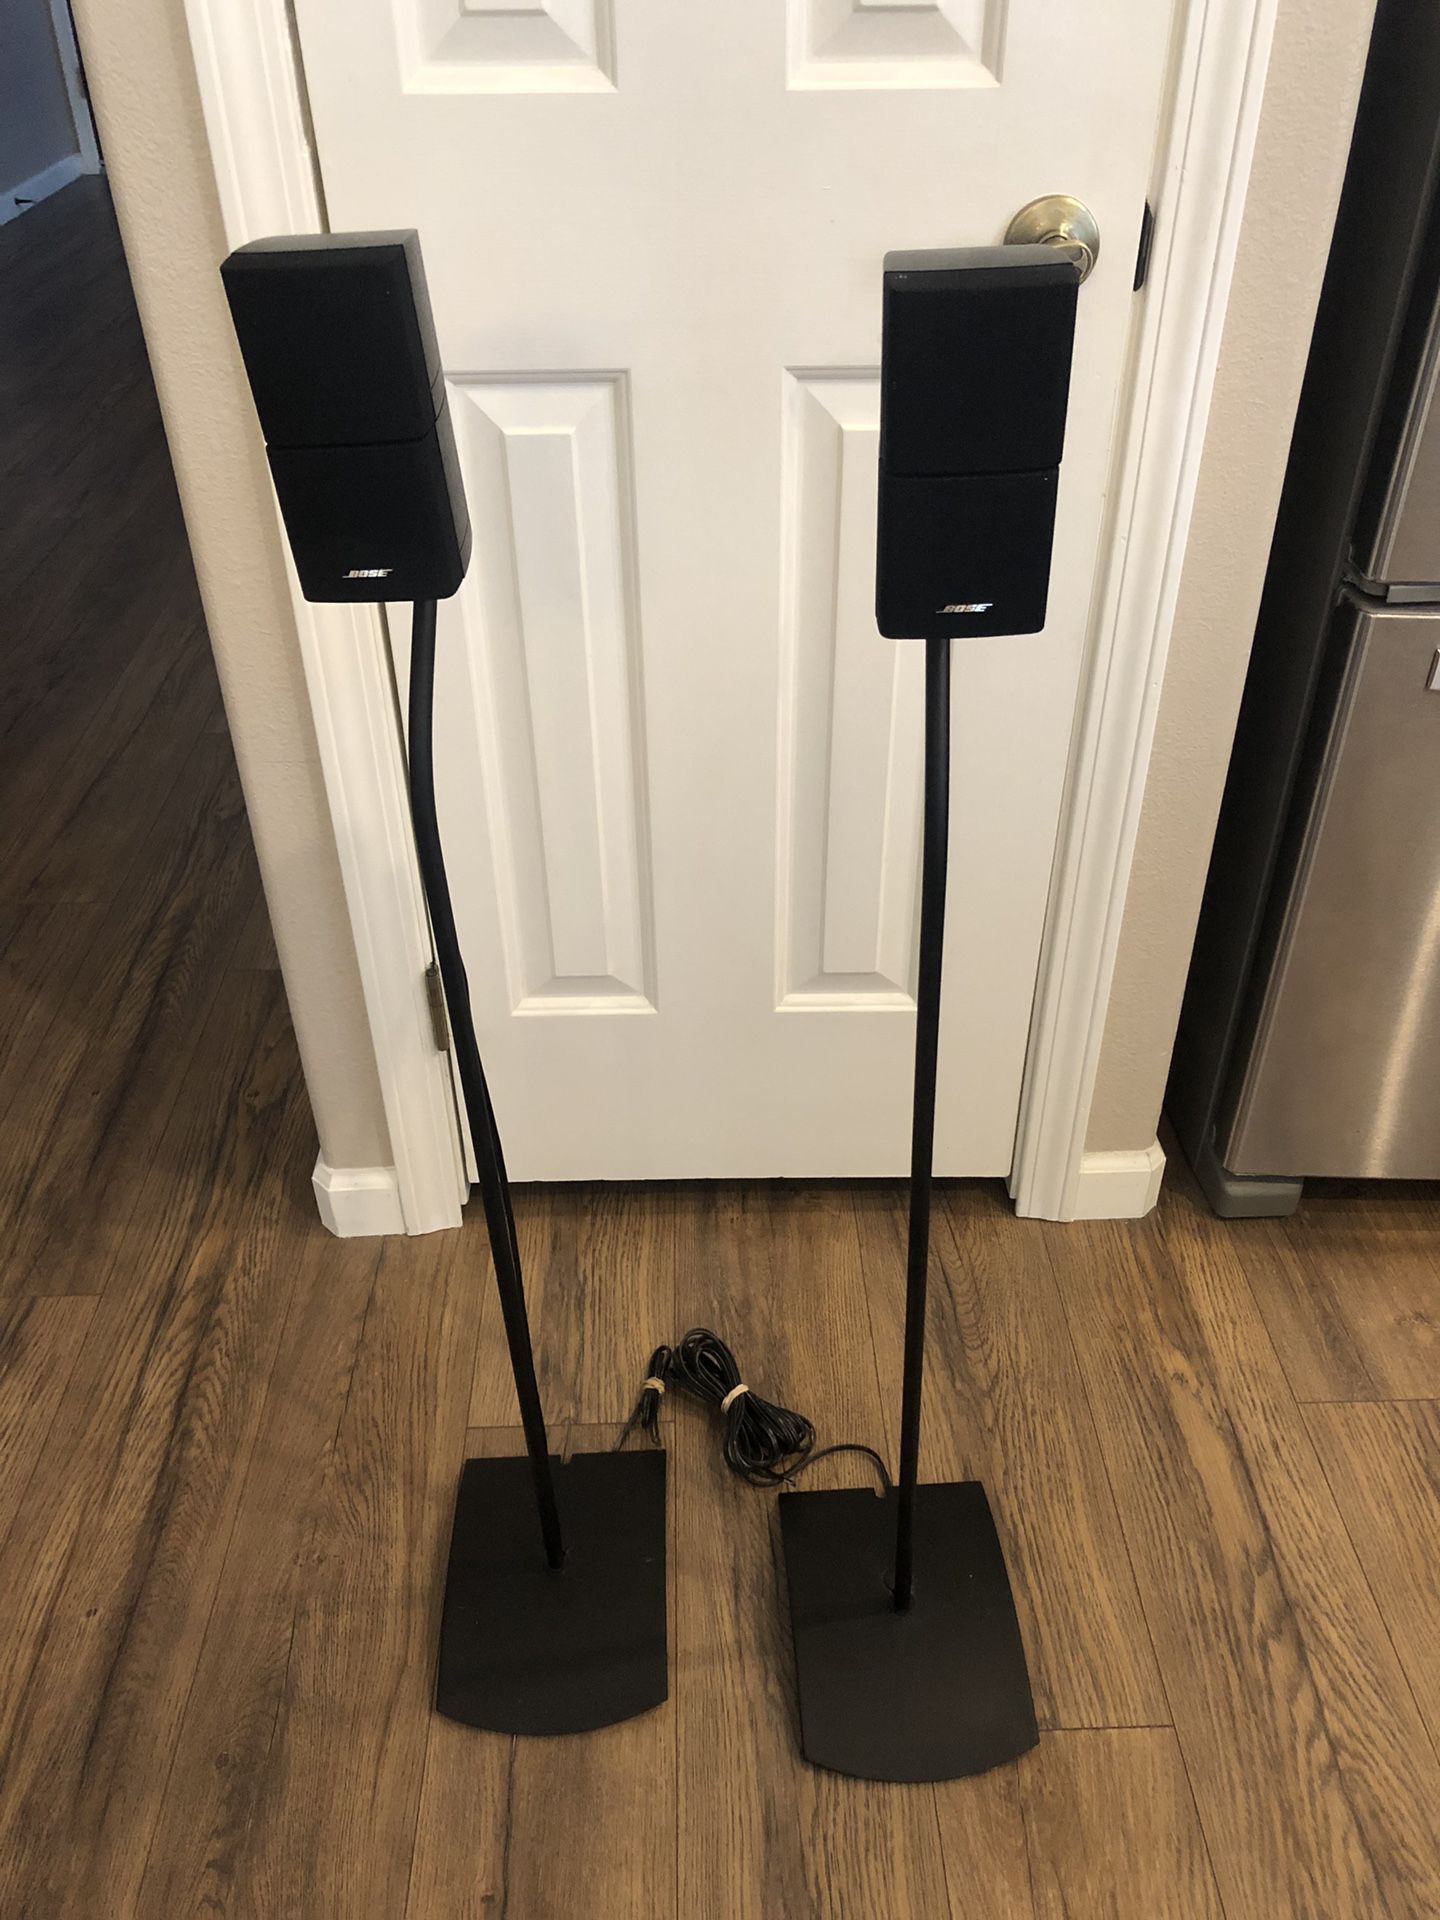 2 bose cube speakers with stands